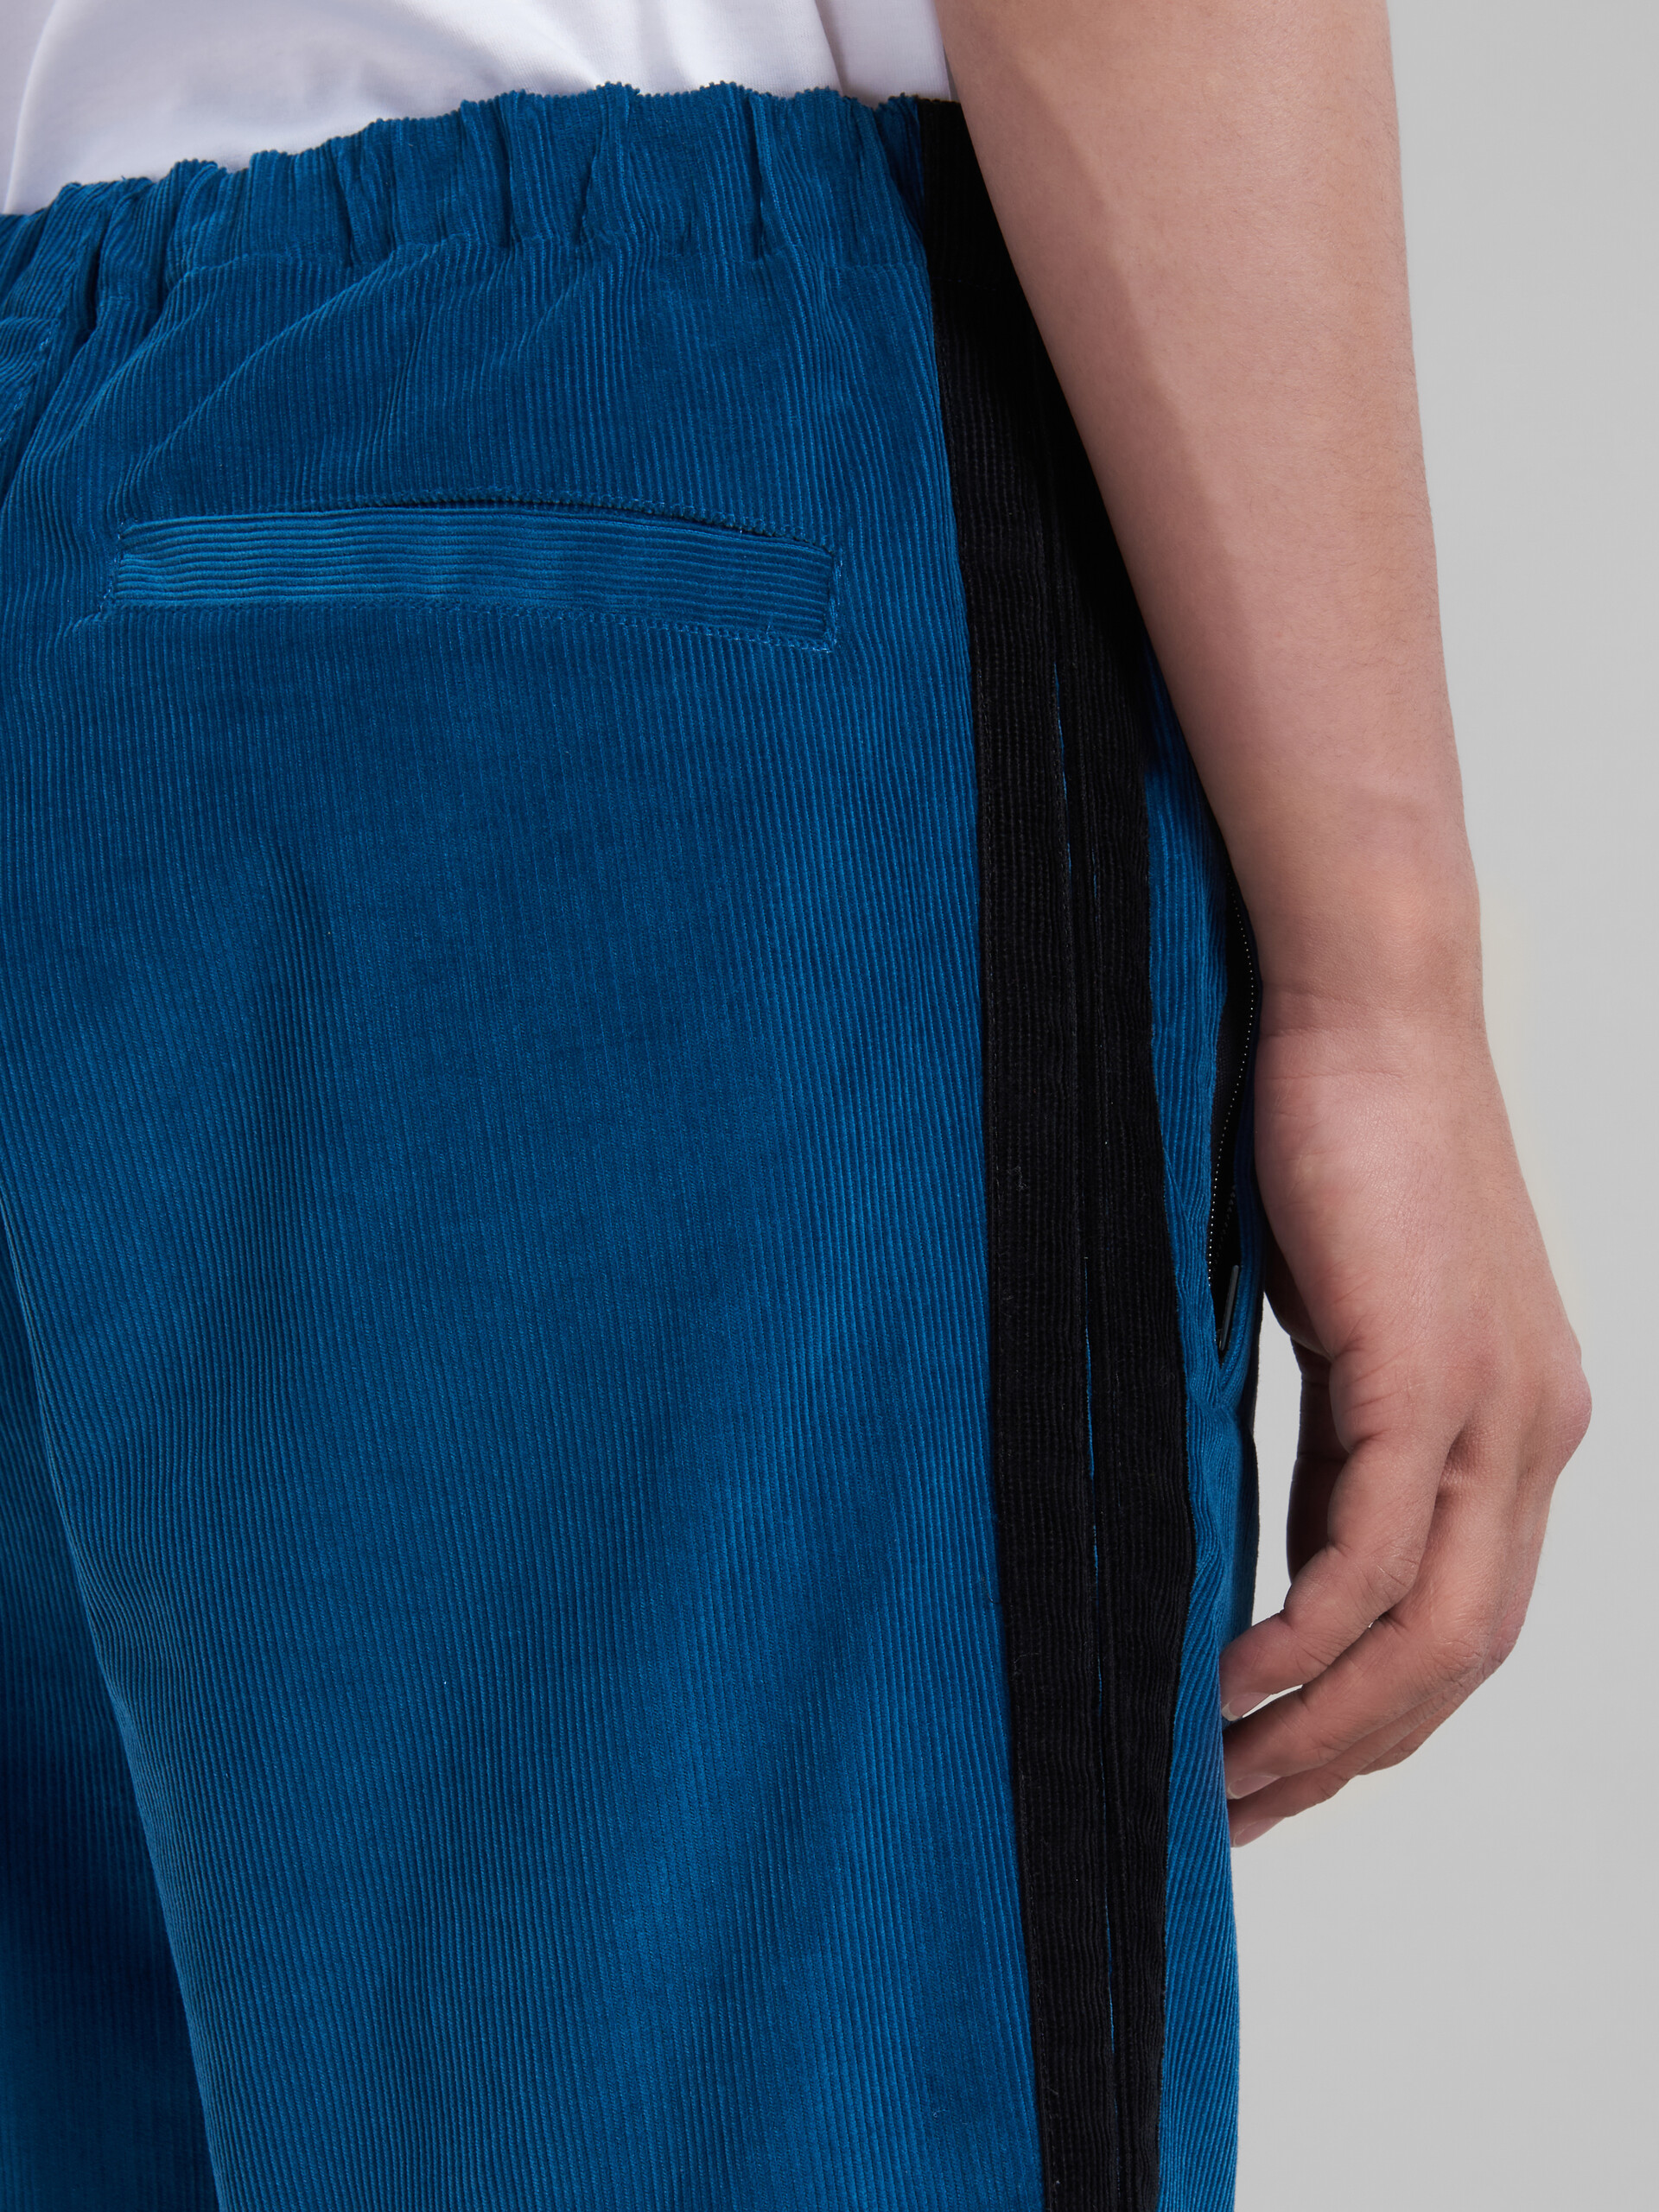 Blue corduroy track pants with side bands - Pants - Image 4